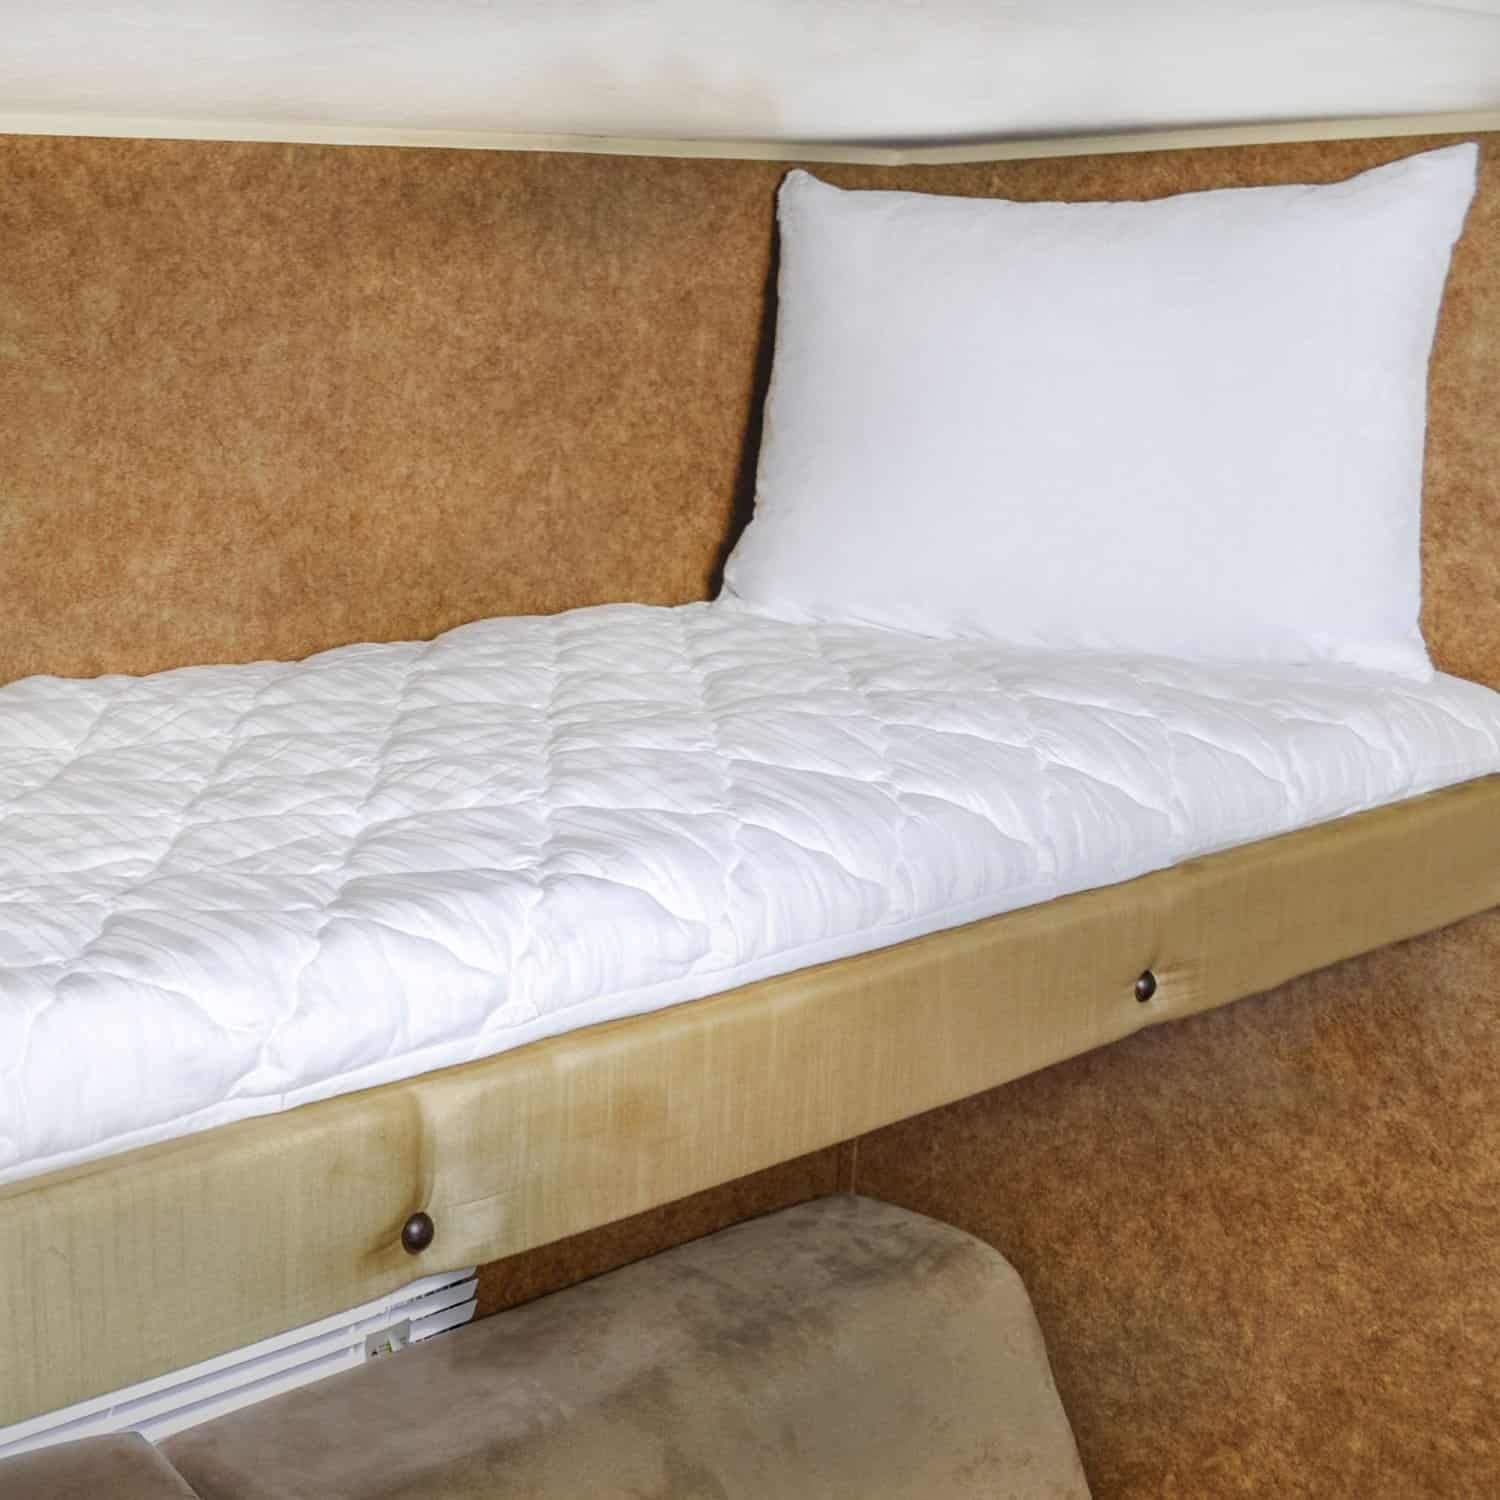 Rv Mattress Sizes Types And Places To Buy Them The Sleep Judge,How To Make Cabbage Soup